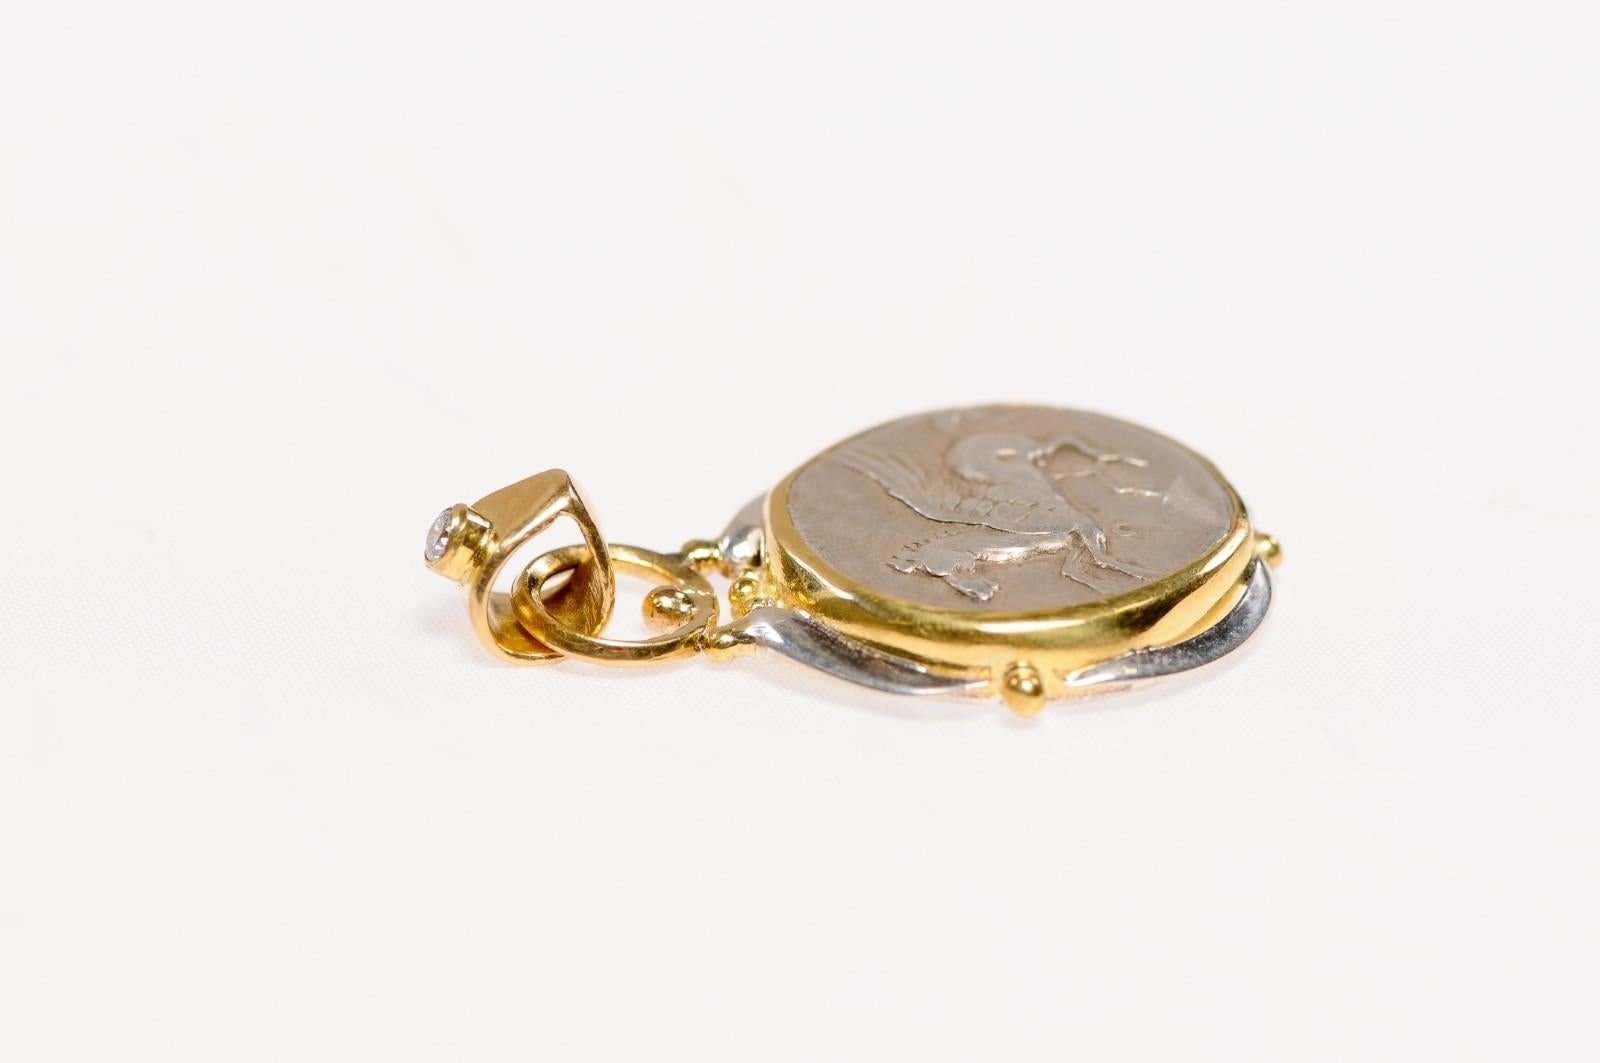 Ancient Pegasus Coin in 22 kt Gold Pendant (pendant only) For Sale 2